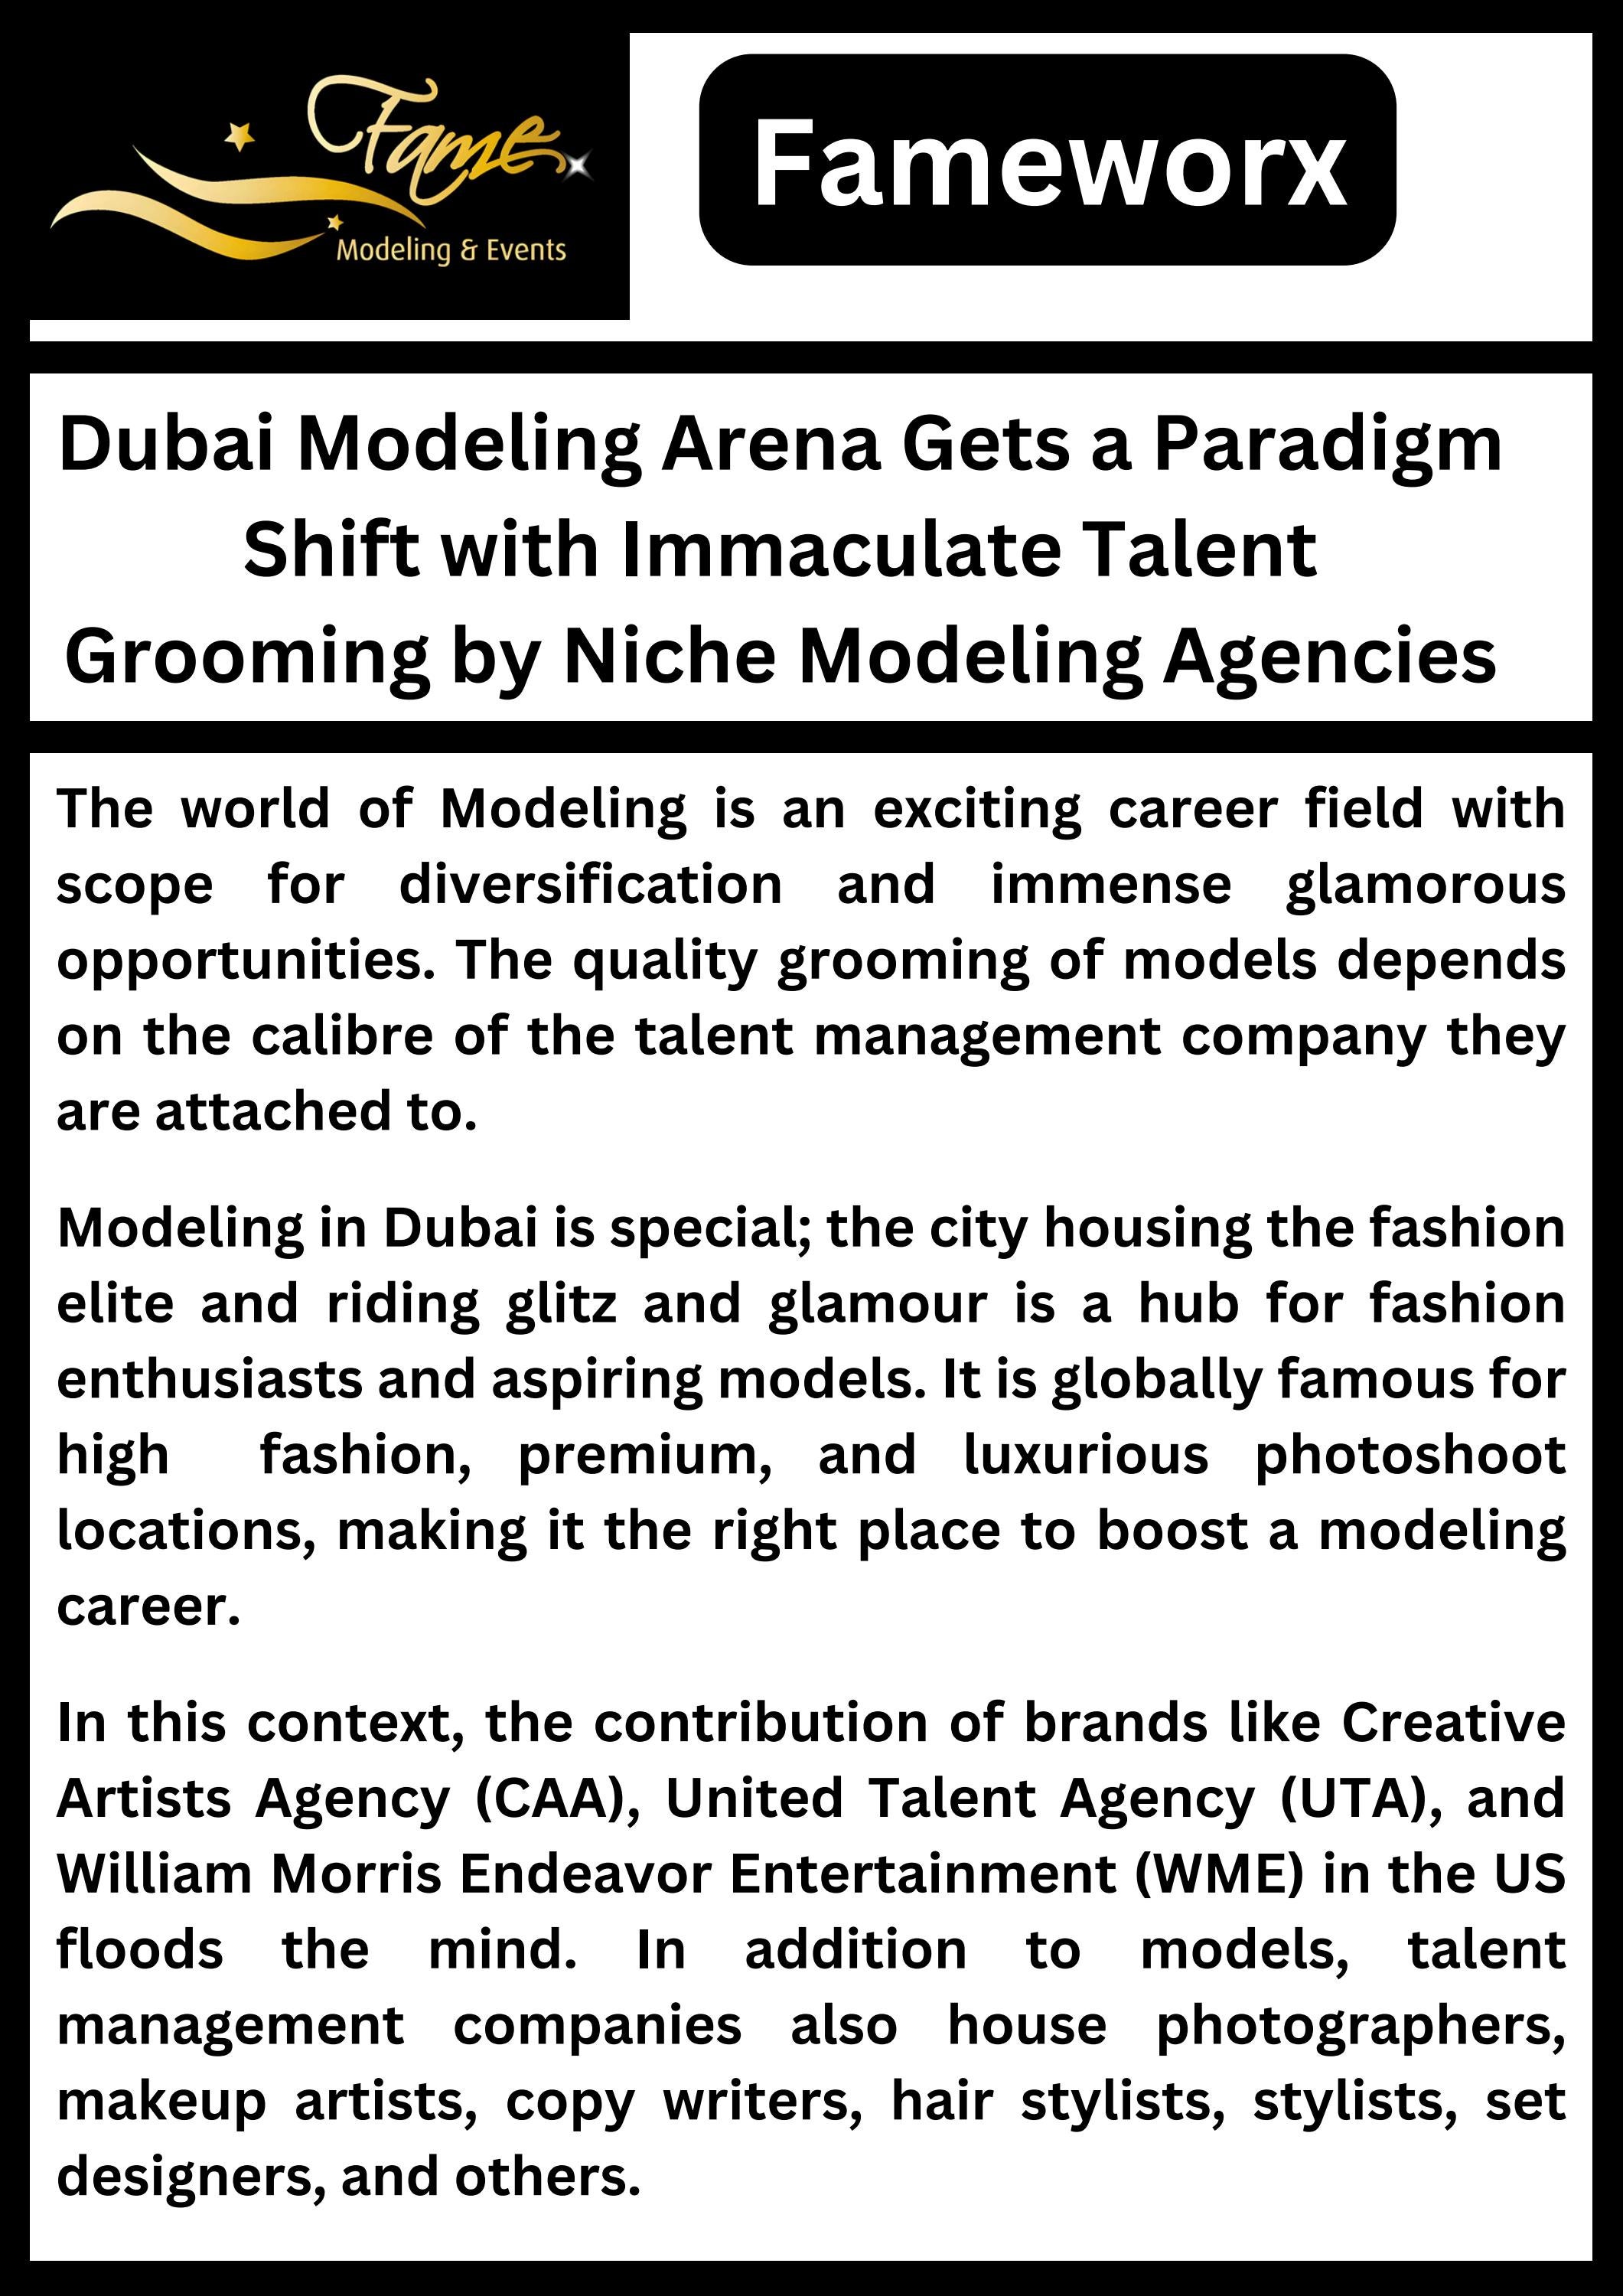 Dubai Modeling Arena Gets a Paradigm Shift with Immaculate Talent Grooming by Niche Modeling Agencies